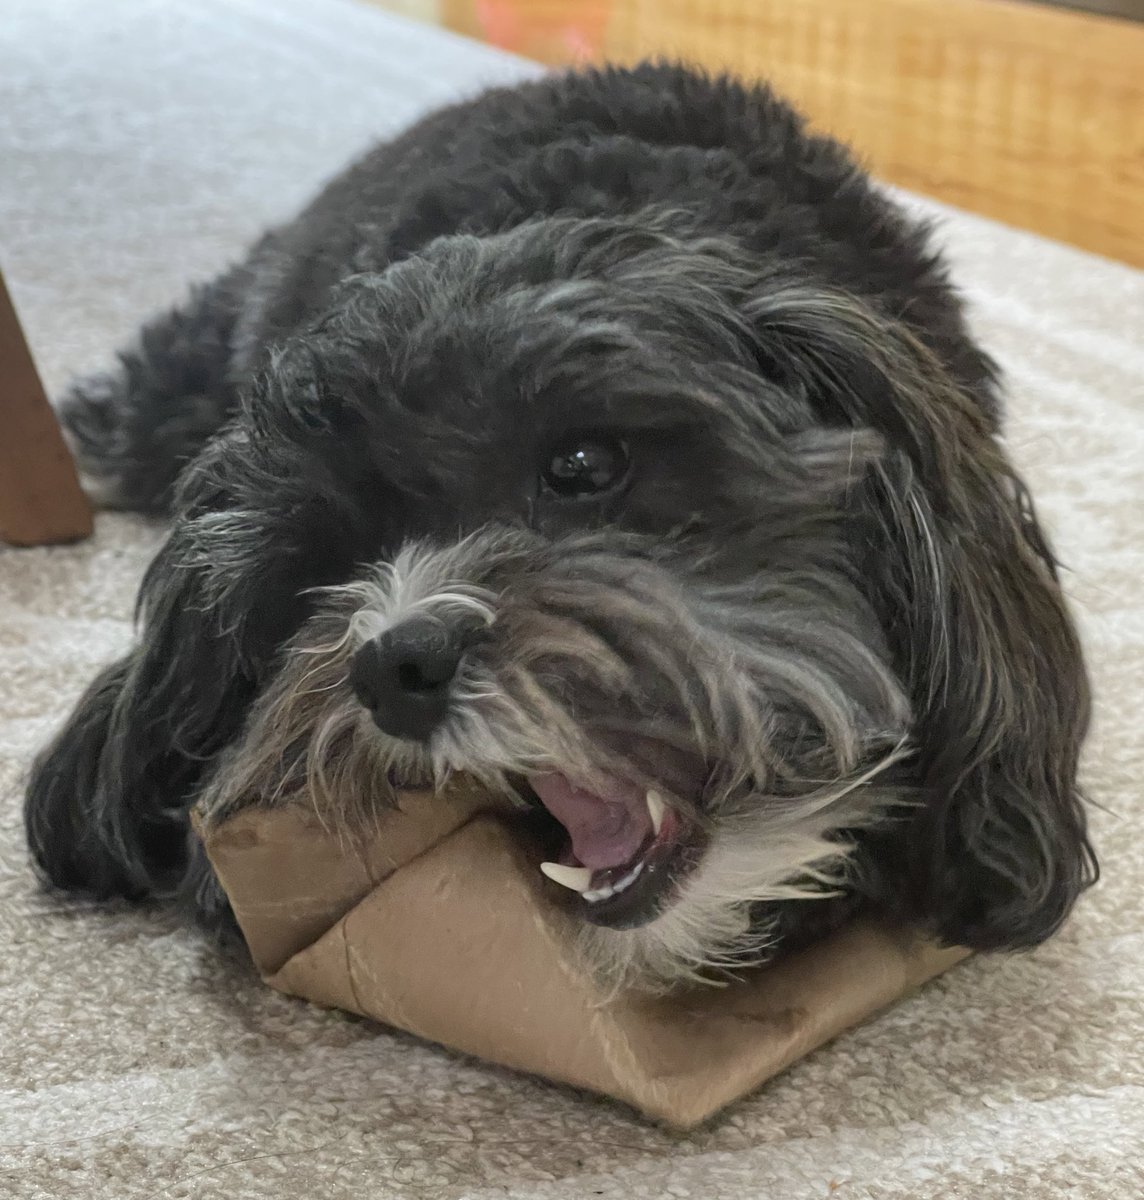 Only one way to deal wif dem rolling cardboard zombs and dats to sink me teef into ‘em 🚫🧟‍♂️🧻🦷 RaaAAA! #ZSHQ #dogs #dogsoftwitter #DogsonTwitter #mondaythoughts